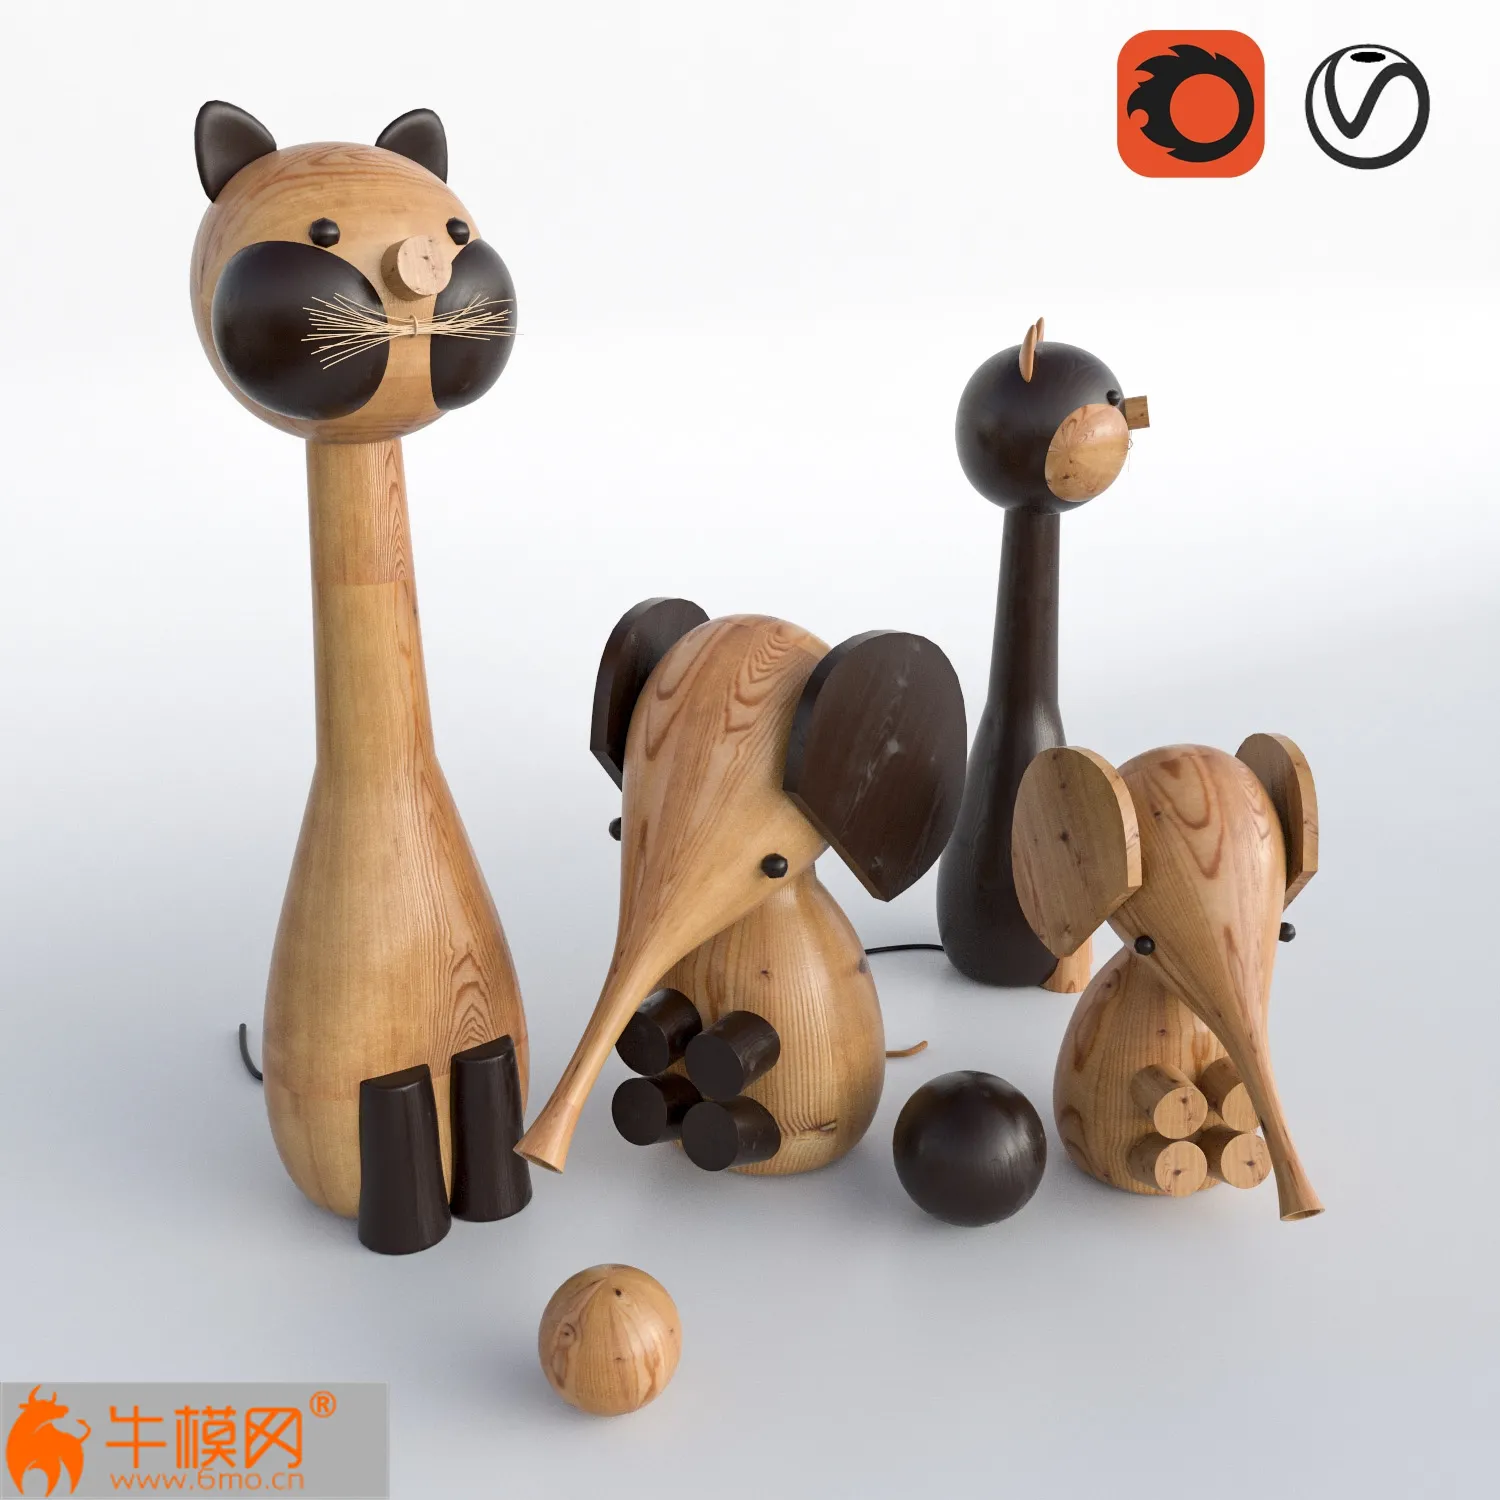 Toys made of wood – 6511